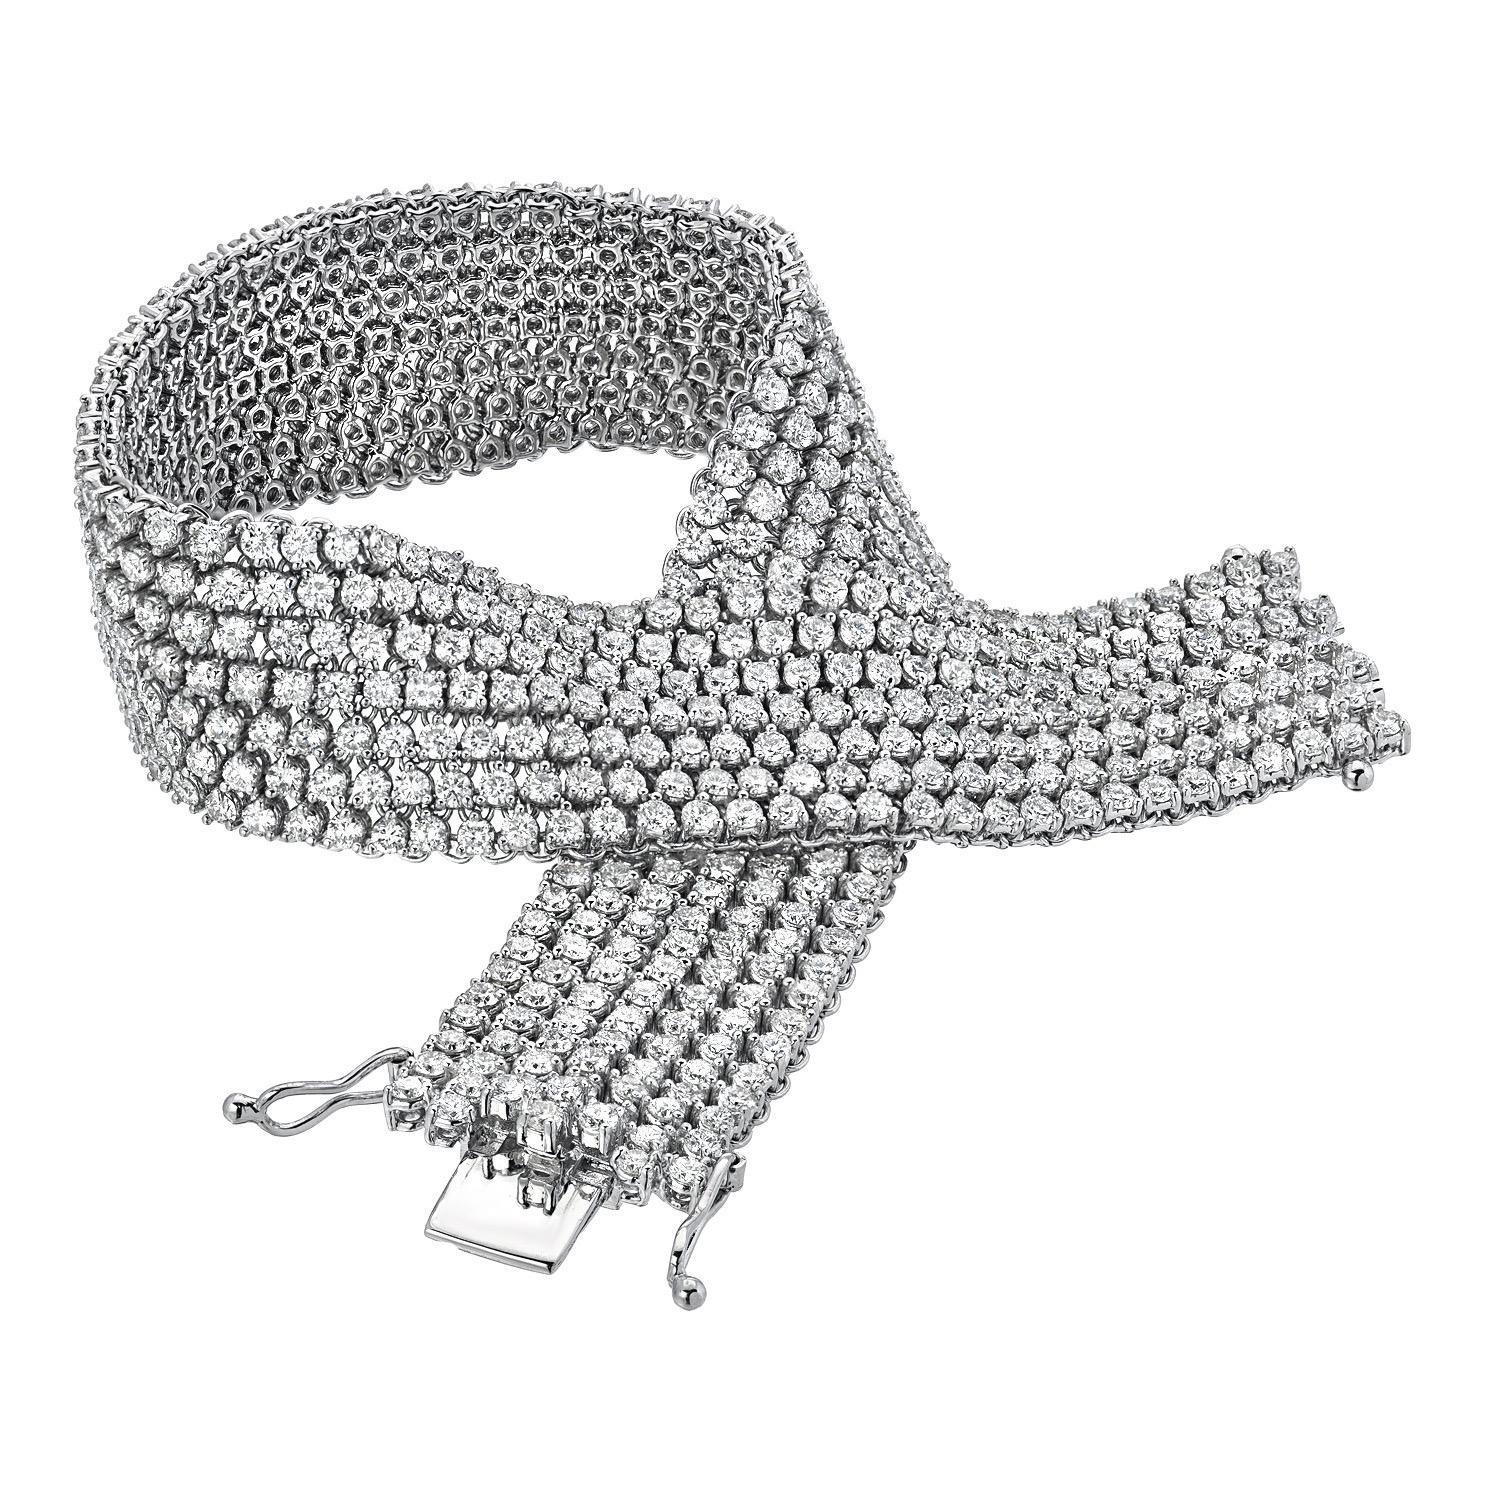 Magnificent flexible Diamond Tennis Mesh Bracelet, weighing a total of 10.99 carats. 
Diamond color: G-H
Diamond clarity: VS-SI1
Diamond bracelet total length - 7.25